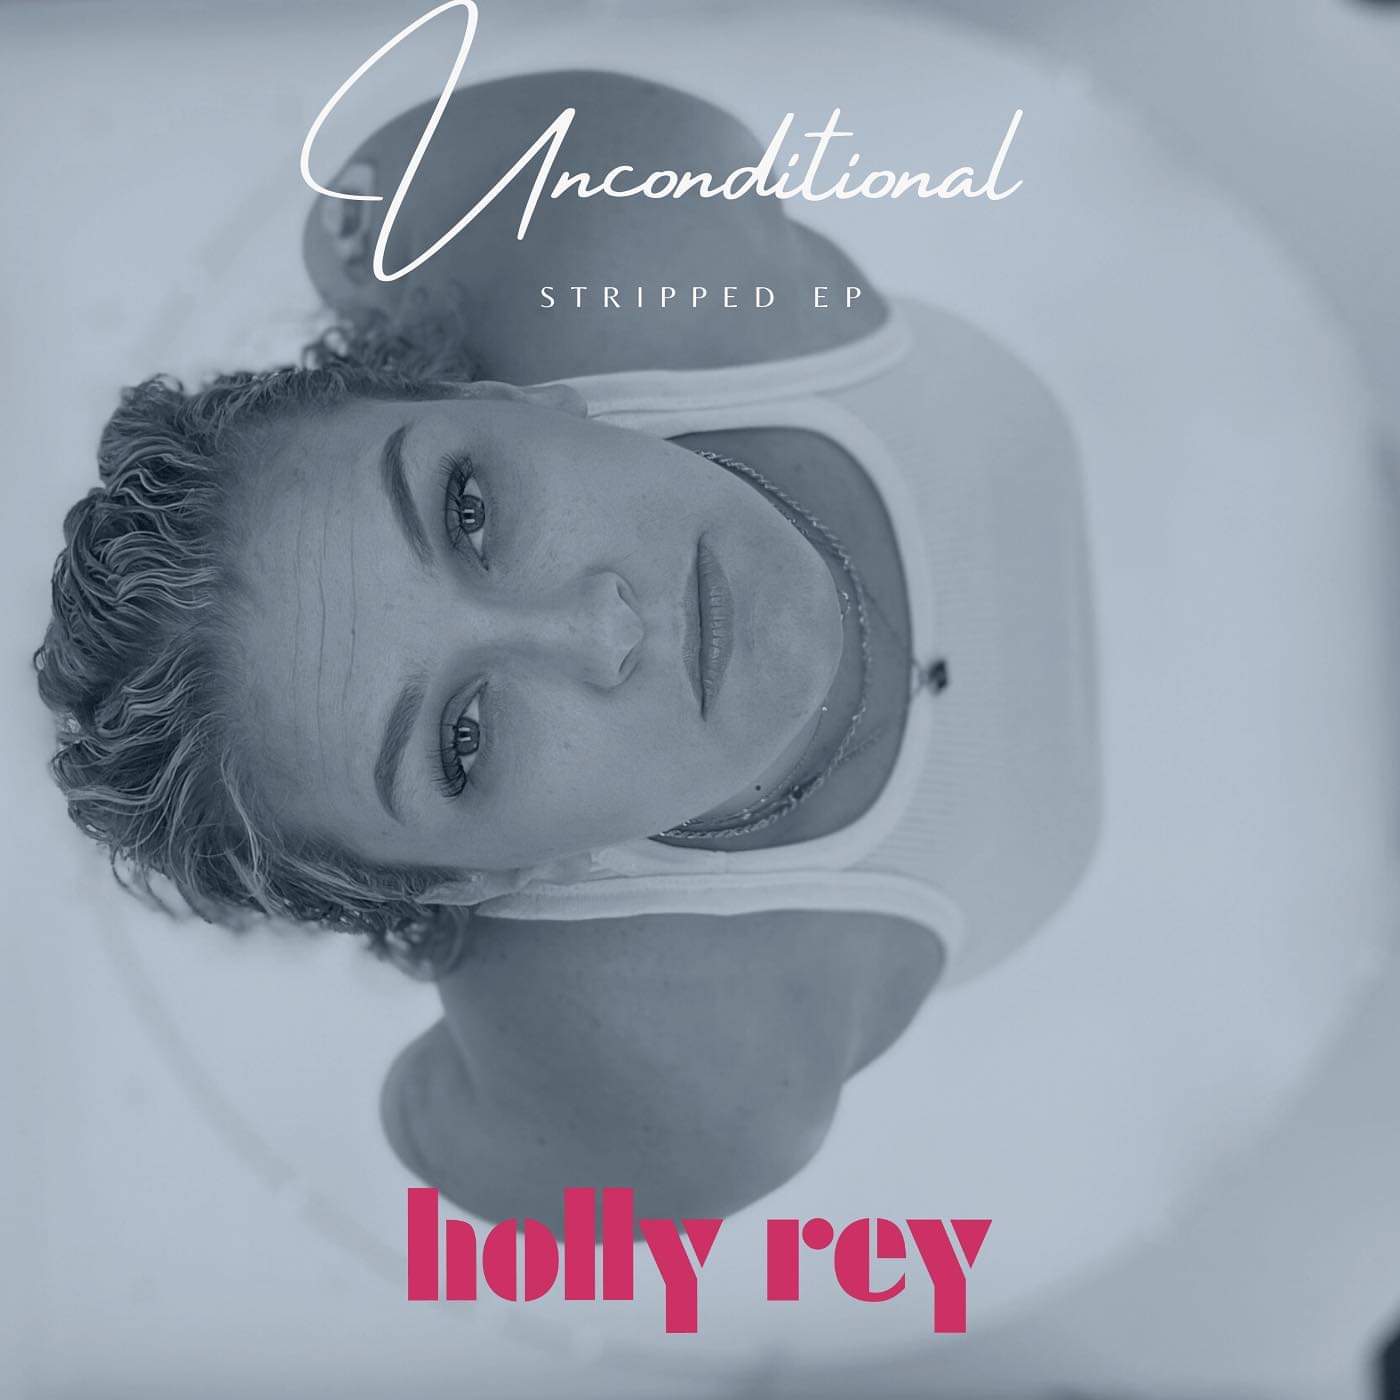 Holly Rey Talks Love In Unconditional Stripped EP